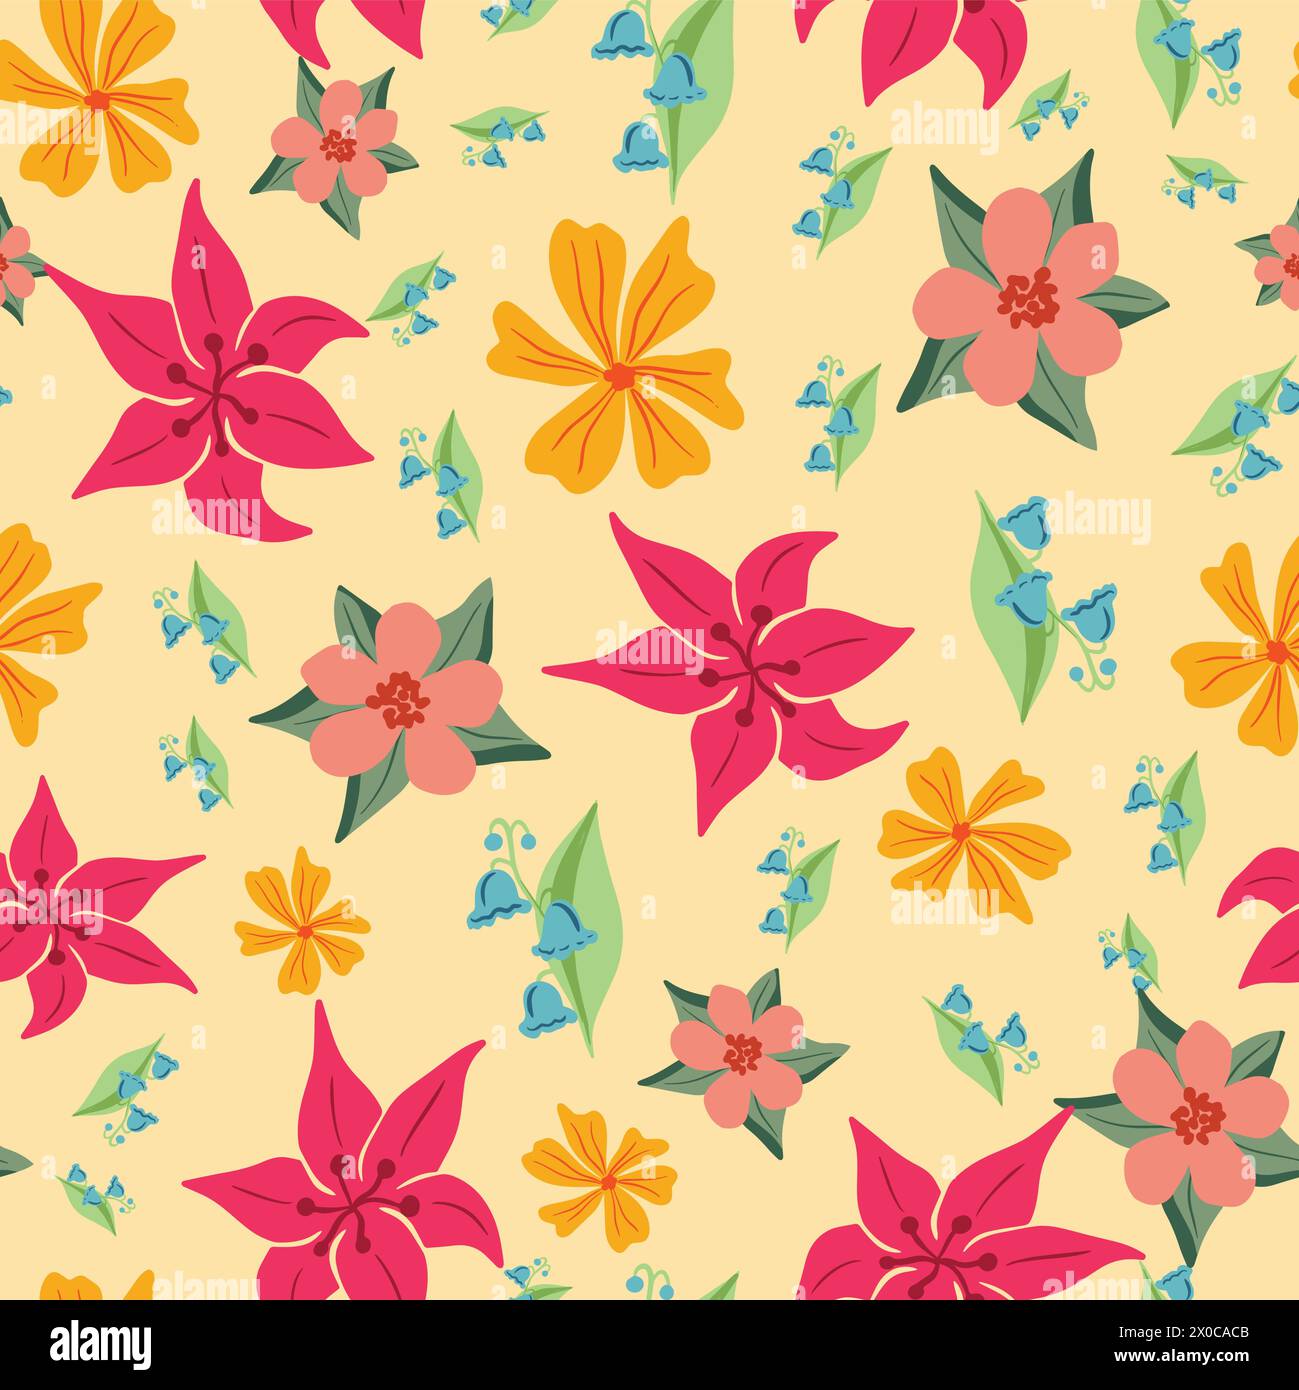 Colorful spring flowers vector repeat pattern on yellow background Stock Vector